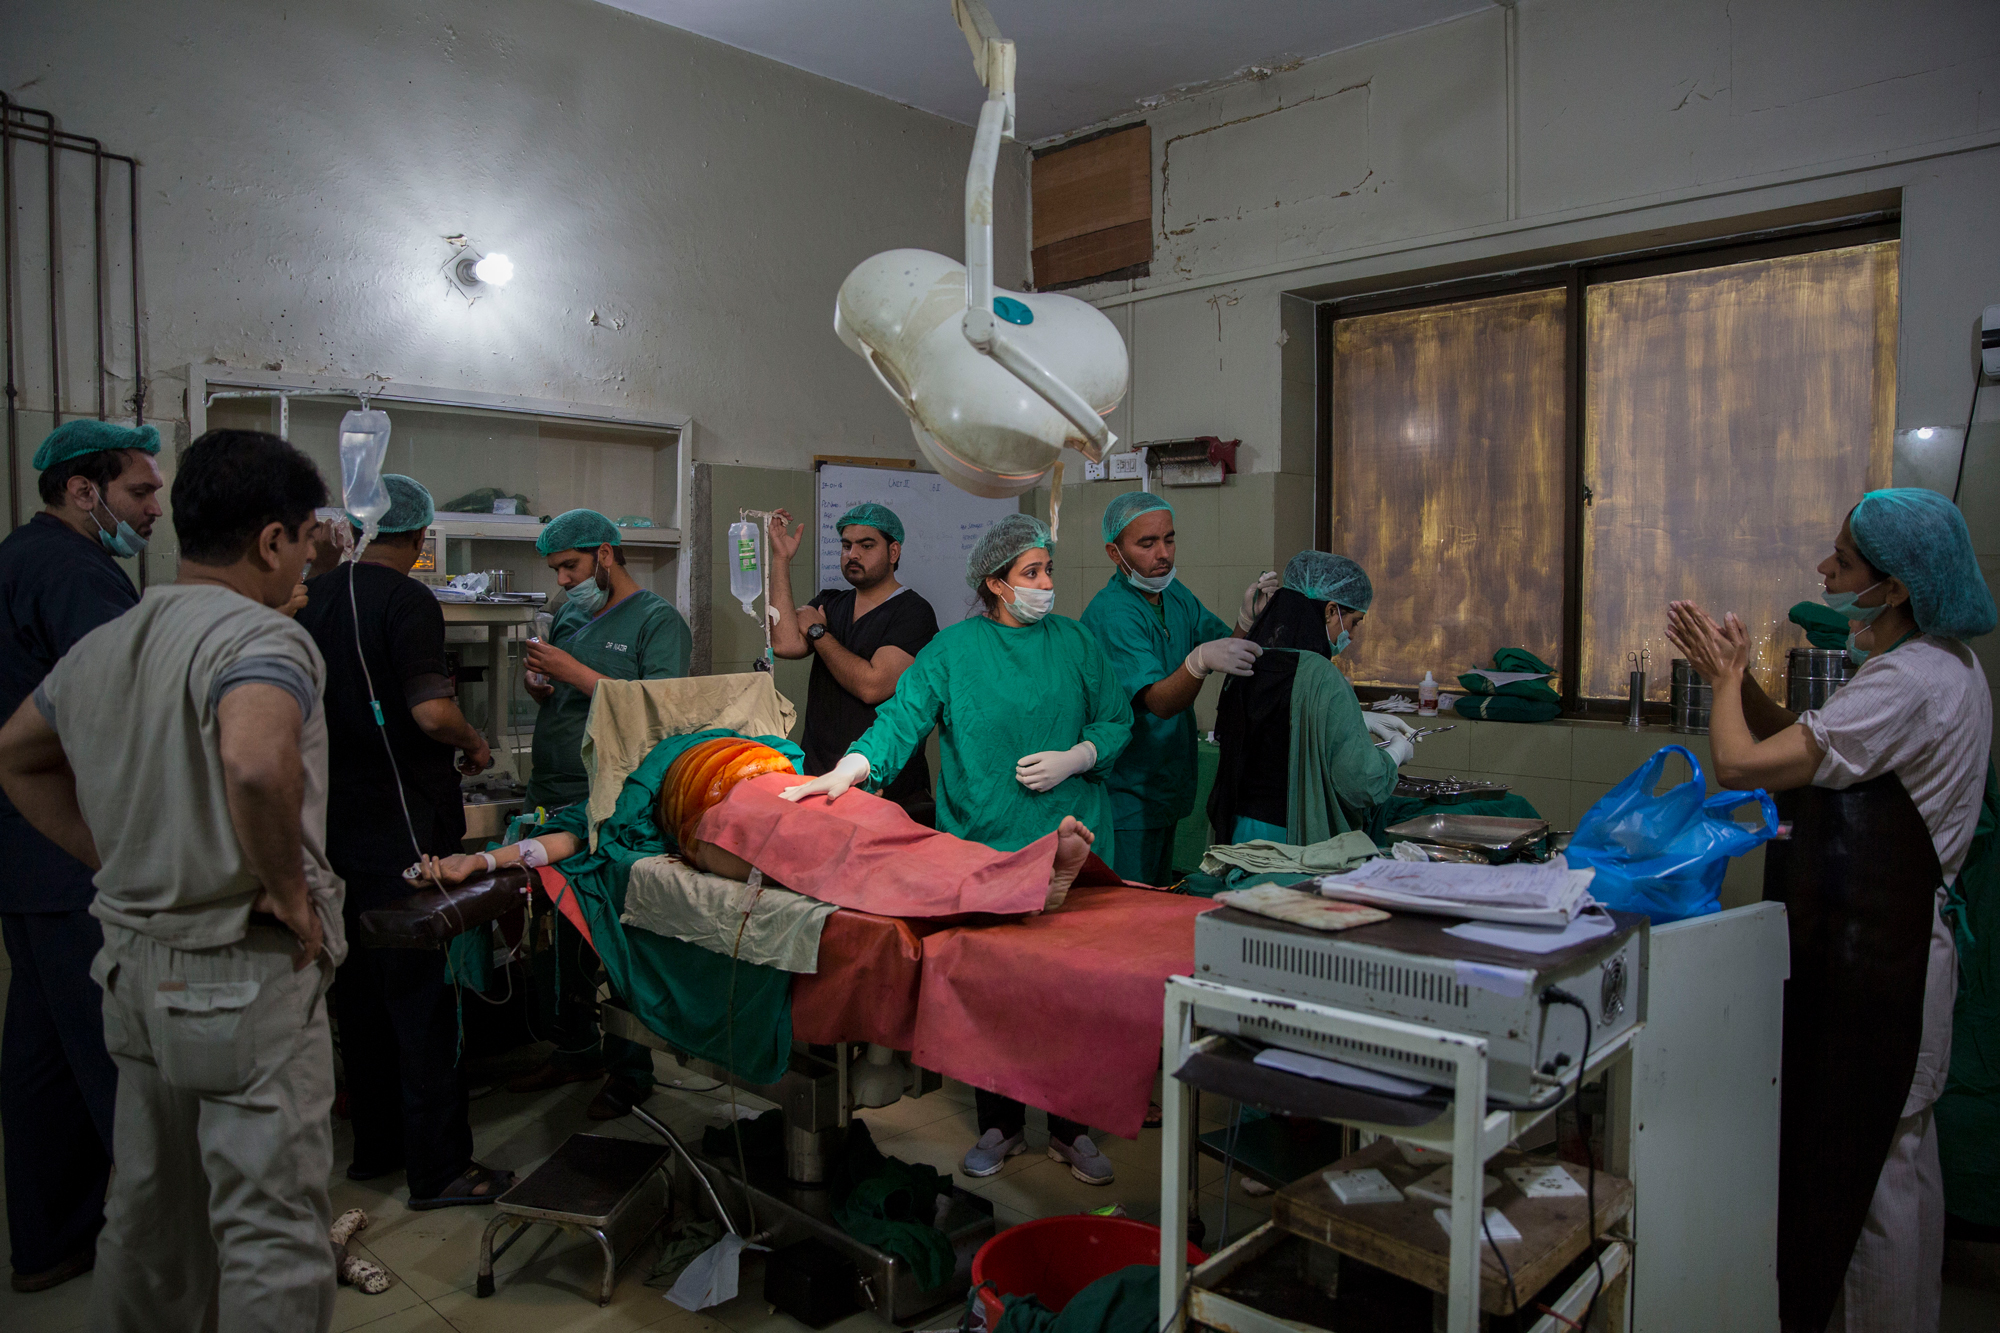 Dr Sadia Khan, with her team of doctors and technicians, preparing for a C-section on a woman who is at risk of postpartum haemorrhaging. They have arranged for tranexamic acid and blood for transfusion to be ready in the operation theatre. Holy Family Hospital, Rawalpindi. Saiyna Bashir © Wellcome Trust